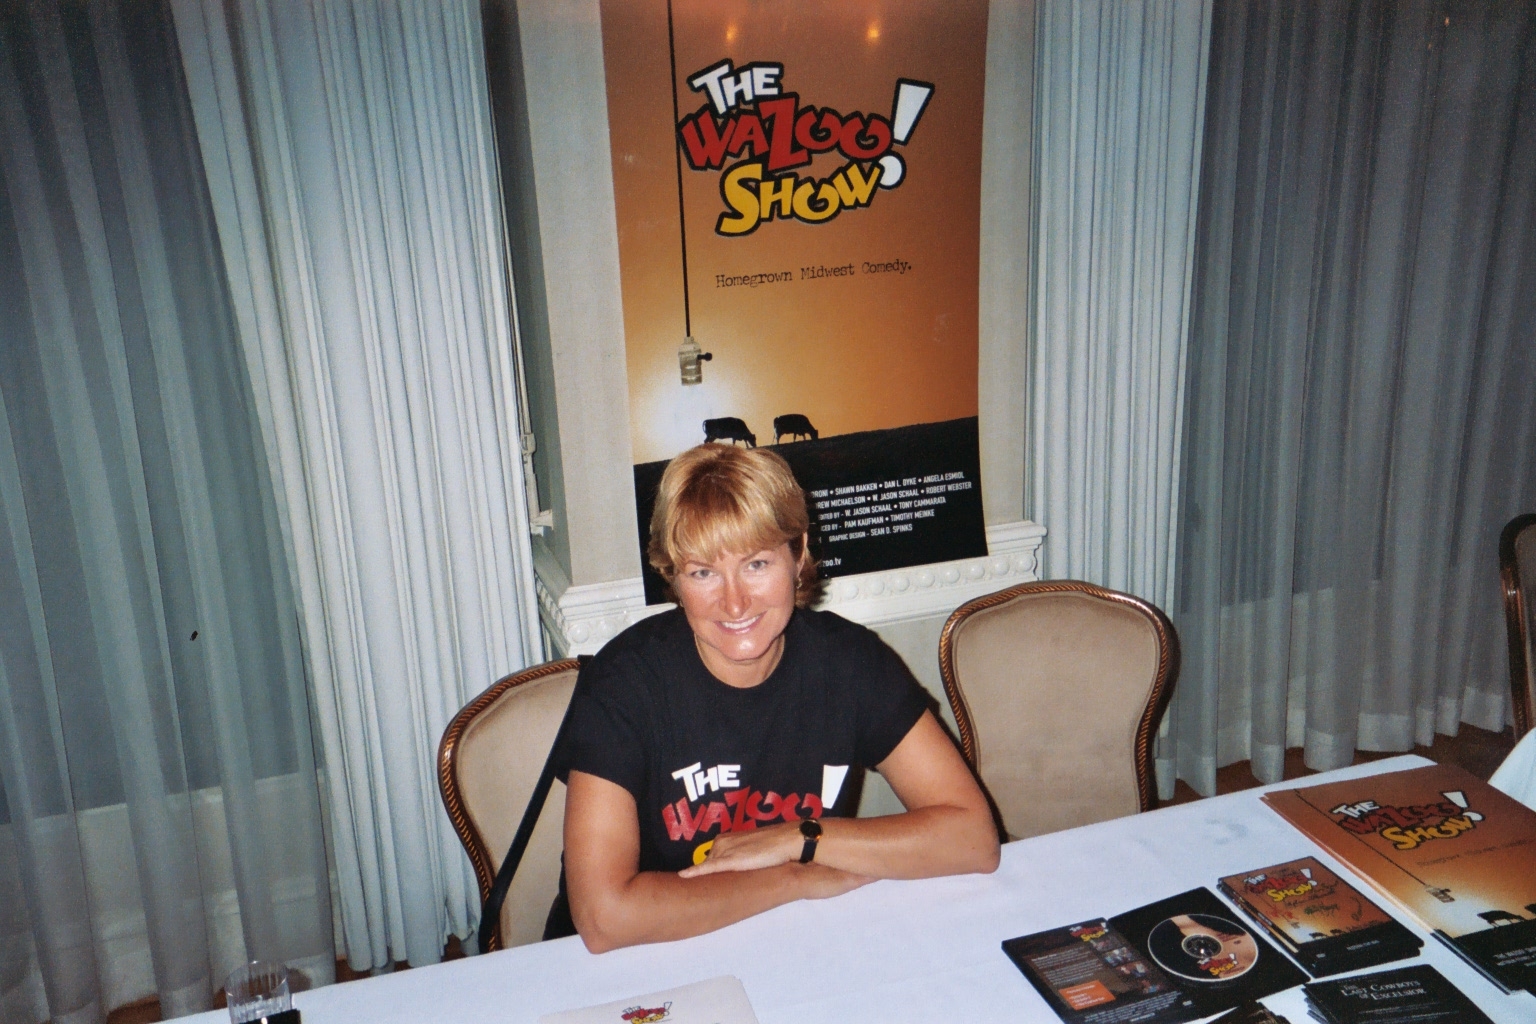 Stephanie Allensworth at the 2004 NY International FIlm Fest in LA.